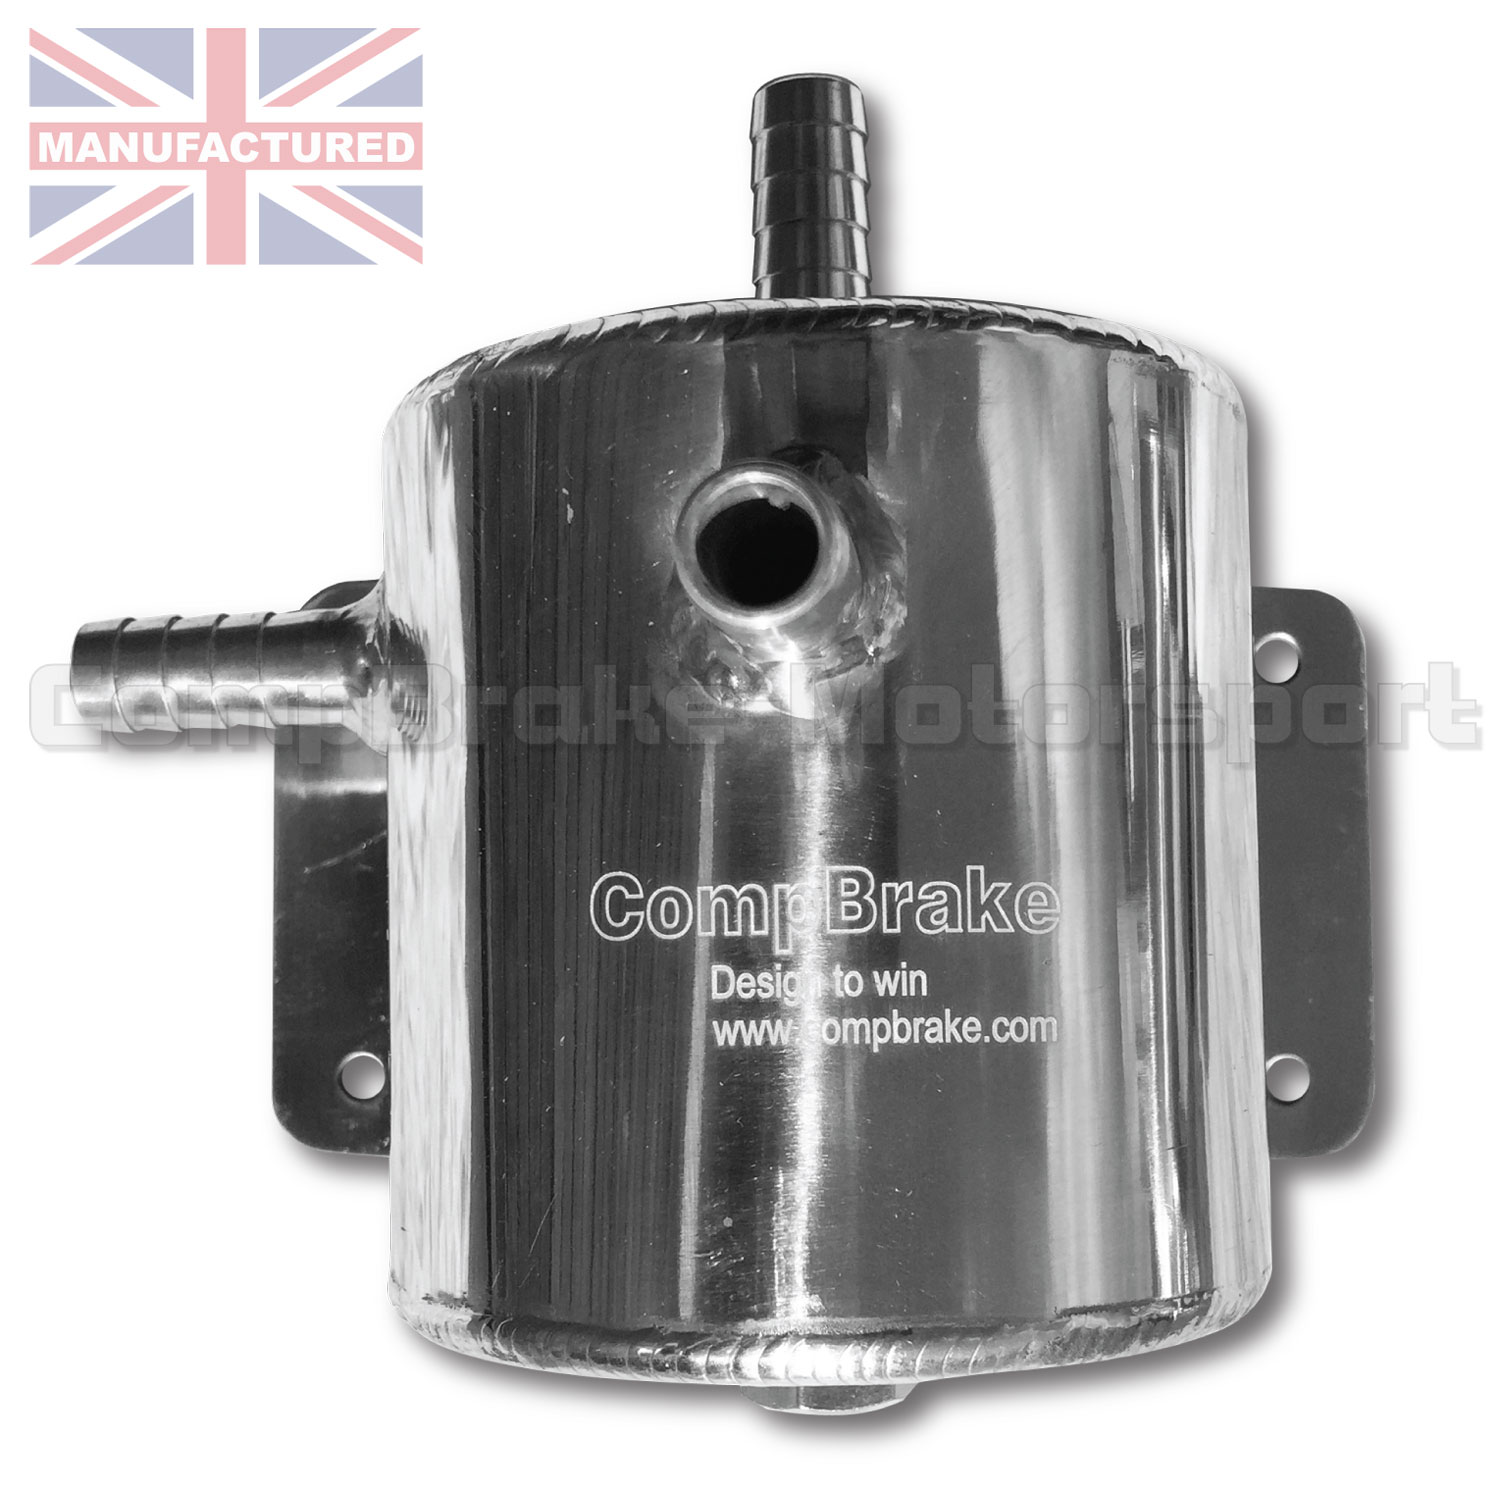 0.5 LTR Oil Catch Tank - Vertical Round Alloy (Bulkhead Mounted